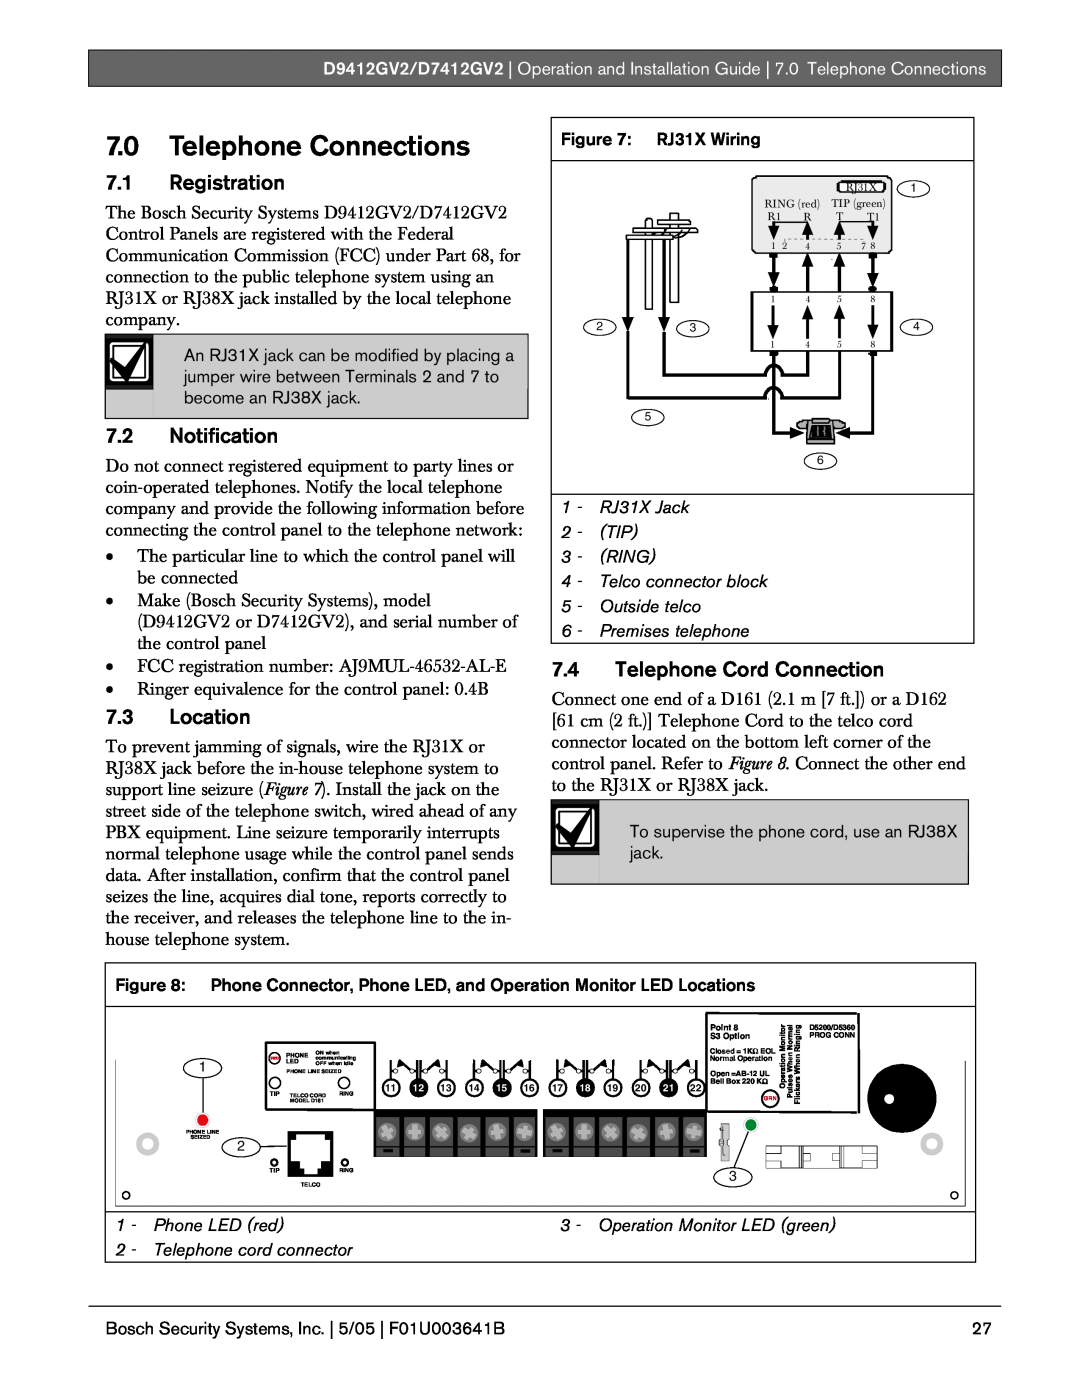 Bosch Appliances D9412GV2 manual 7.0Telephone Connections, 7.1Registration, 7.2Notification, 7.3Location 